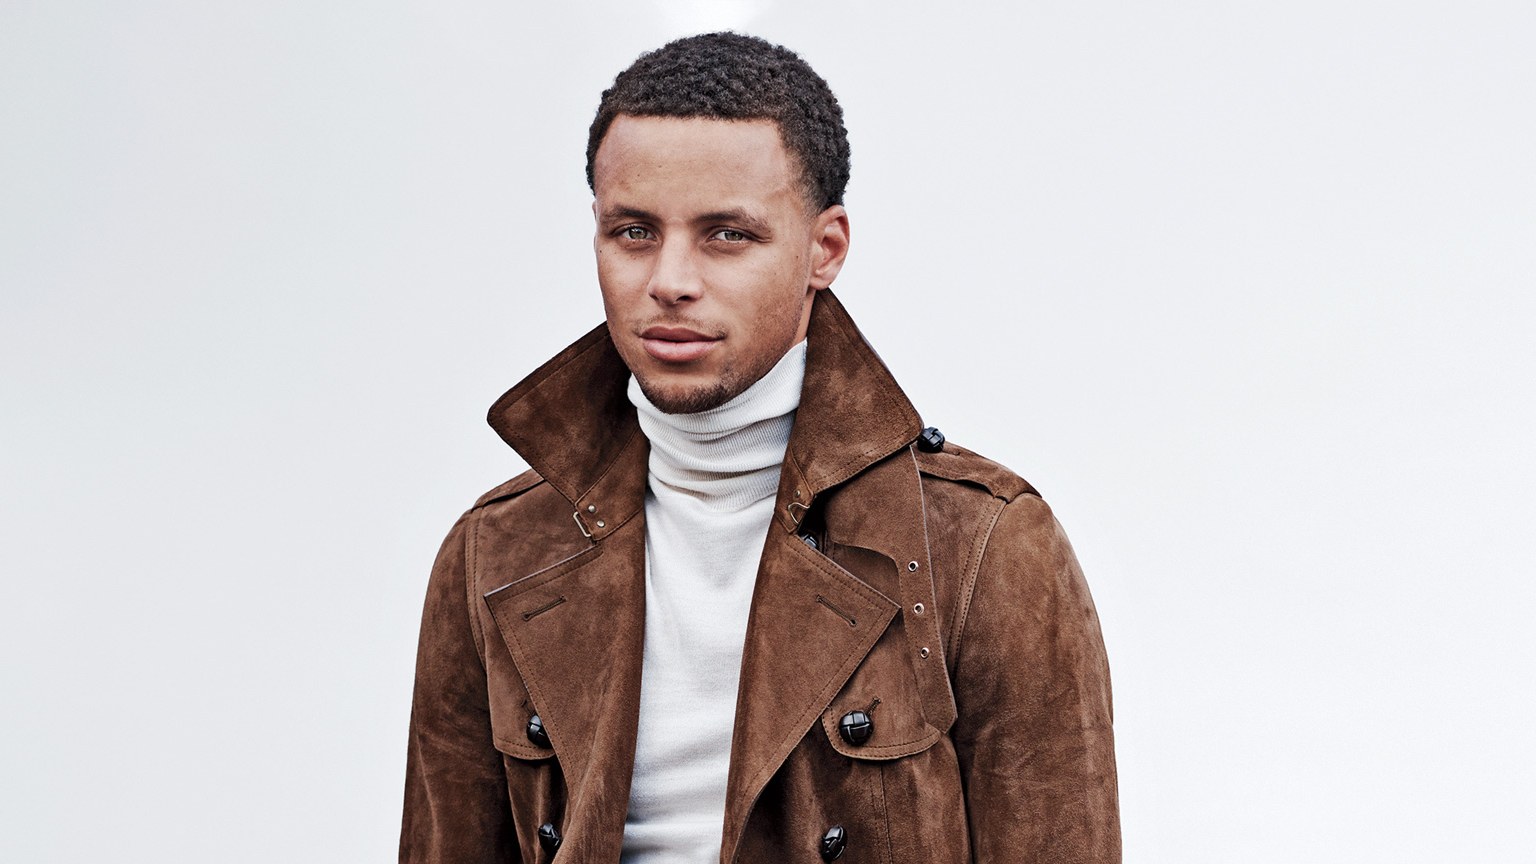 Steph Curry elegant casual Lifestyle Photography from K2 Productions